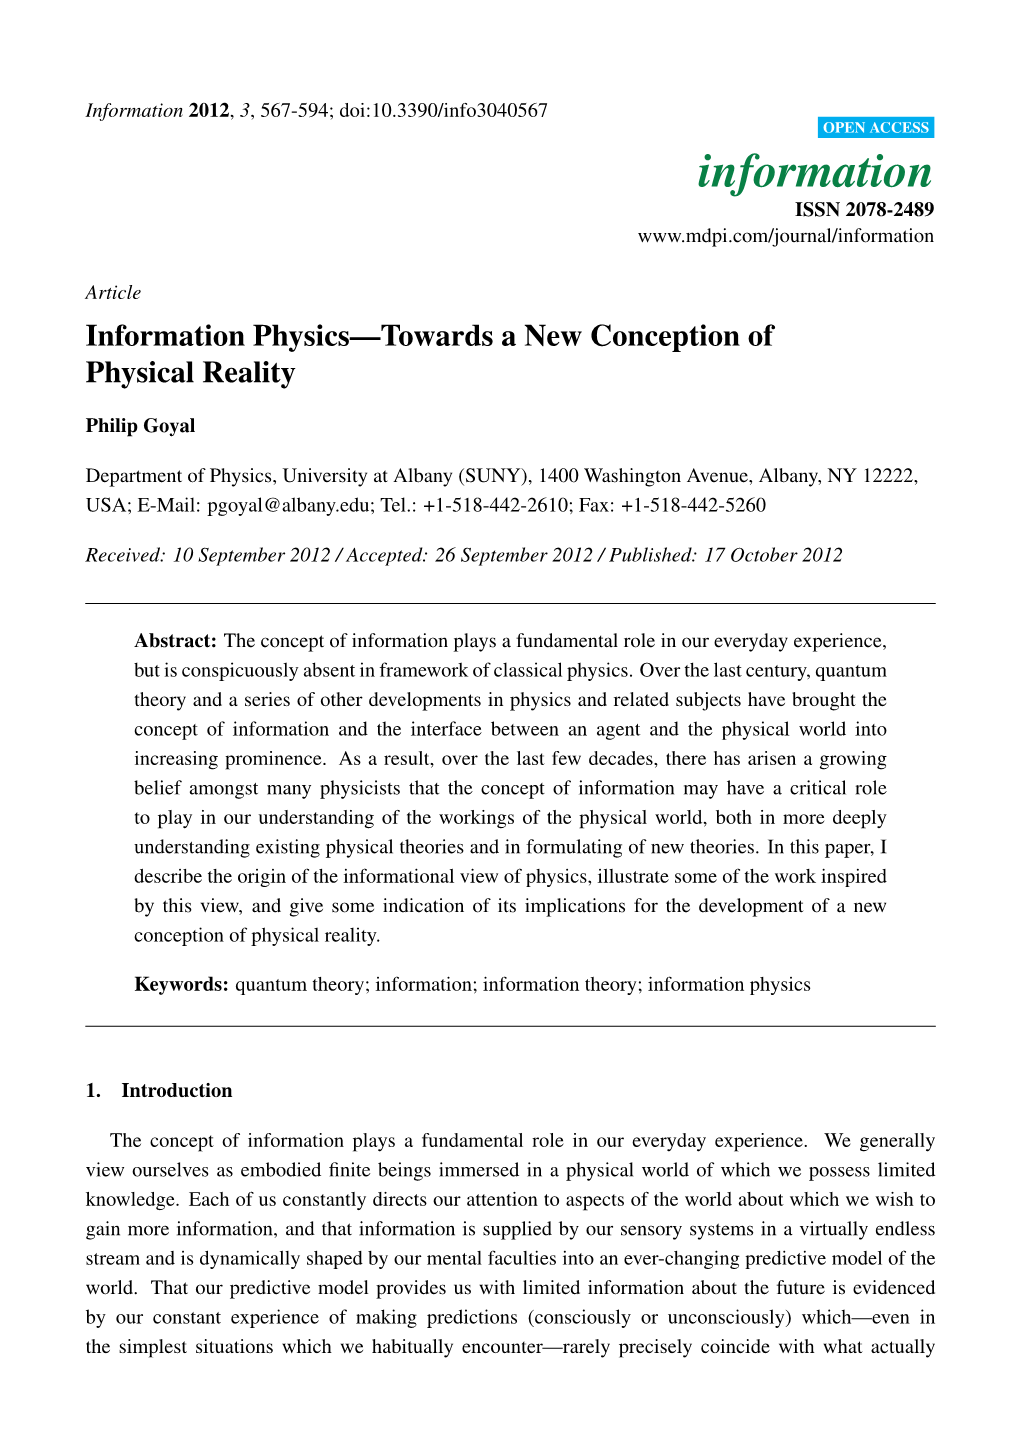 Information Physics—Towards a New Conception of Physical Reality